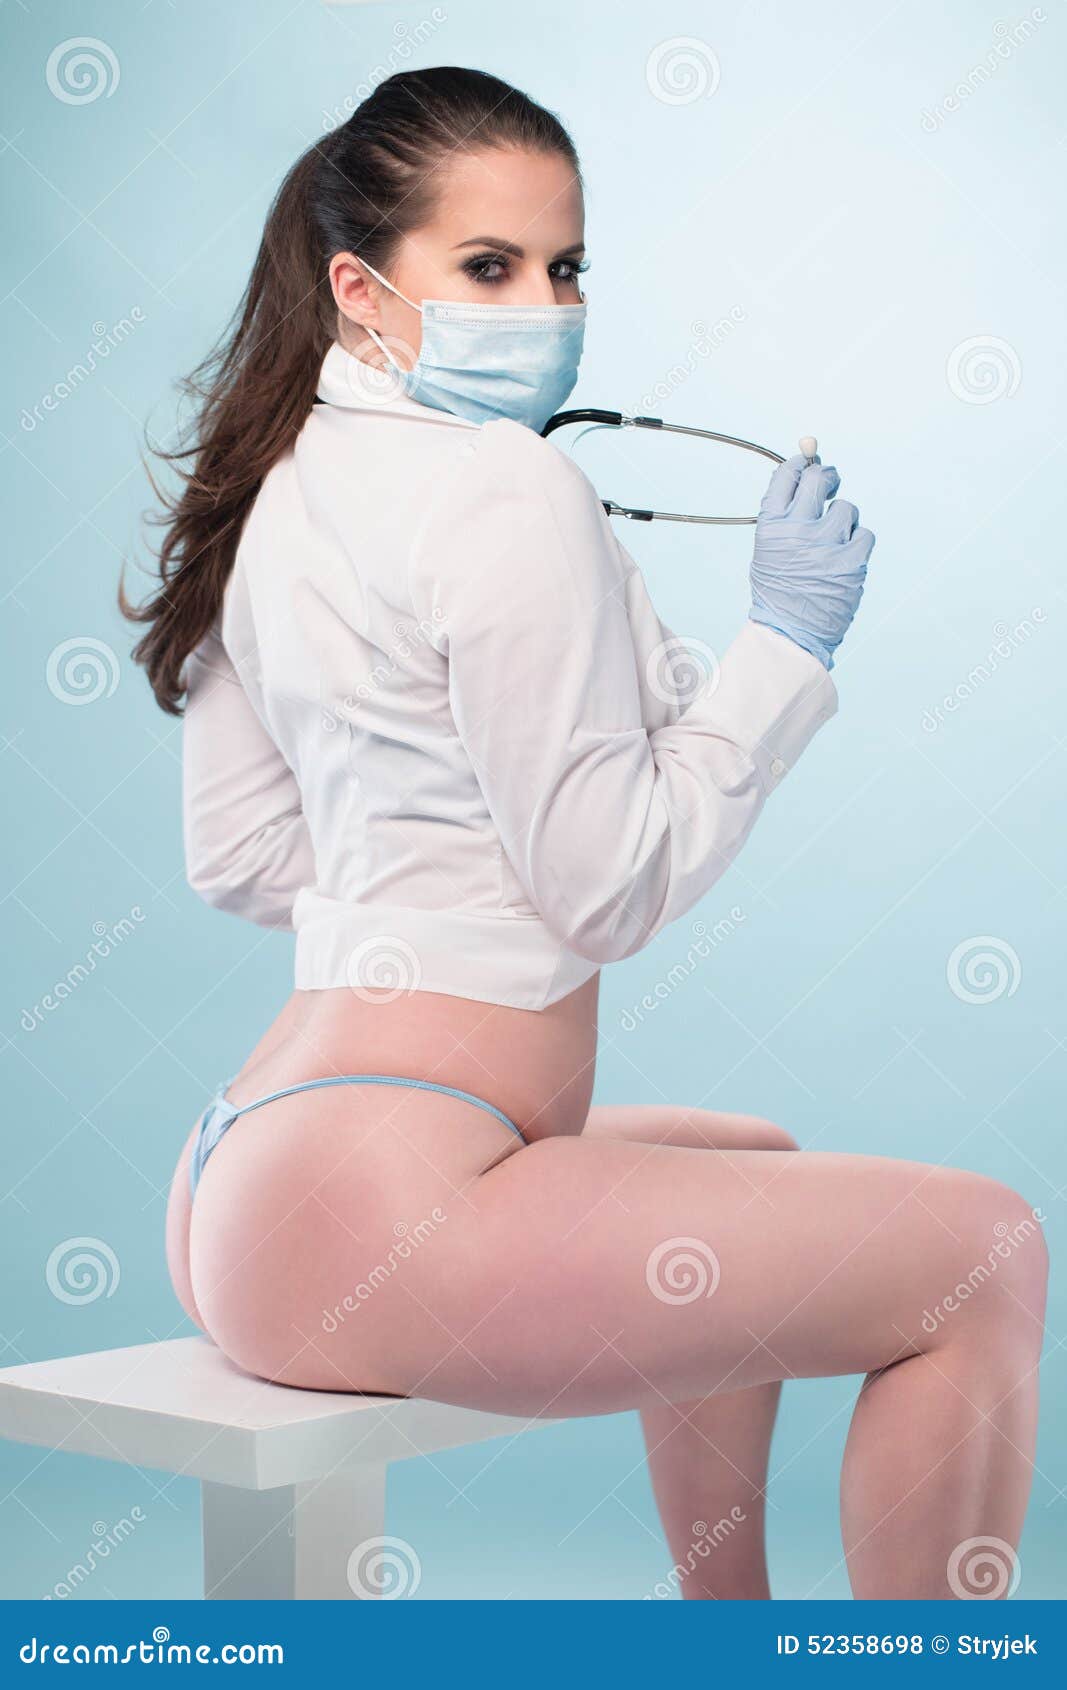 https://thumbs.dreamstime.com/z/sexy-nurse-shirt-panties-sitting-stool-young-female-wearing-white-long-sleeves-t-back-underwear-mask-seductively-52358698.jpg